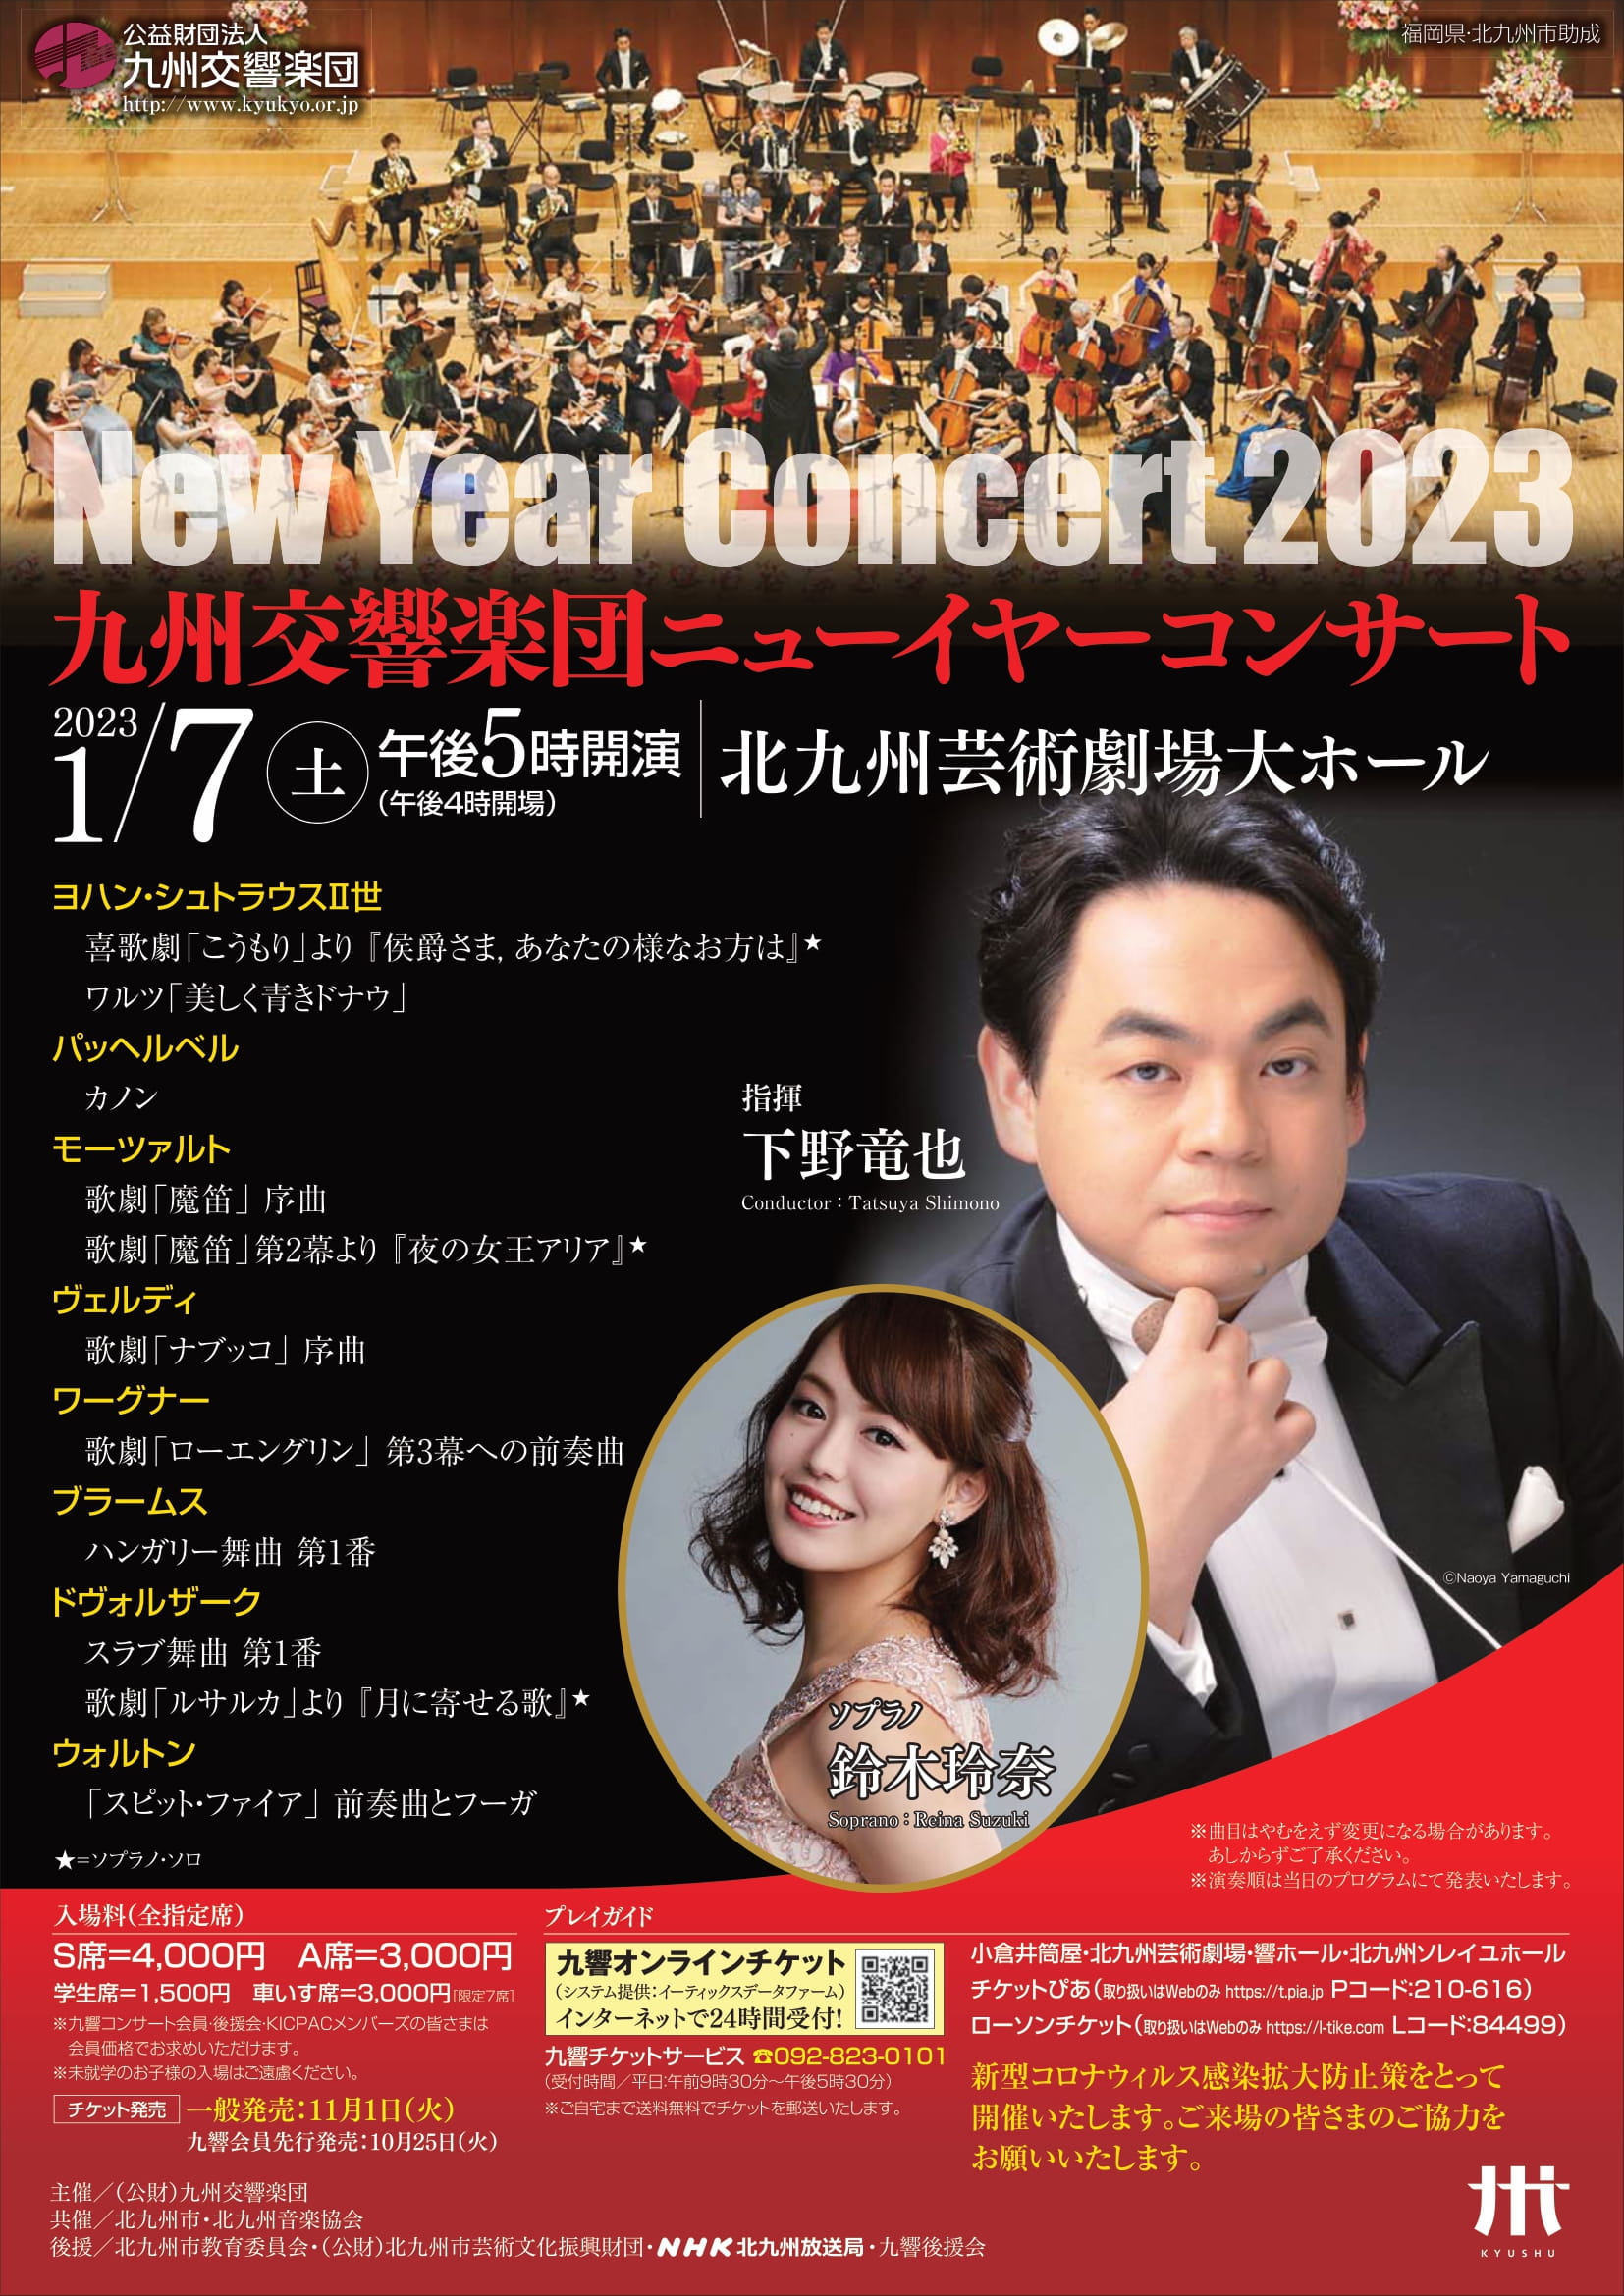 This week’s concert (2 January– 8 January 2023)